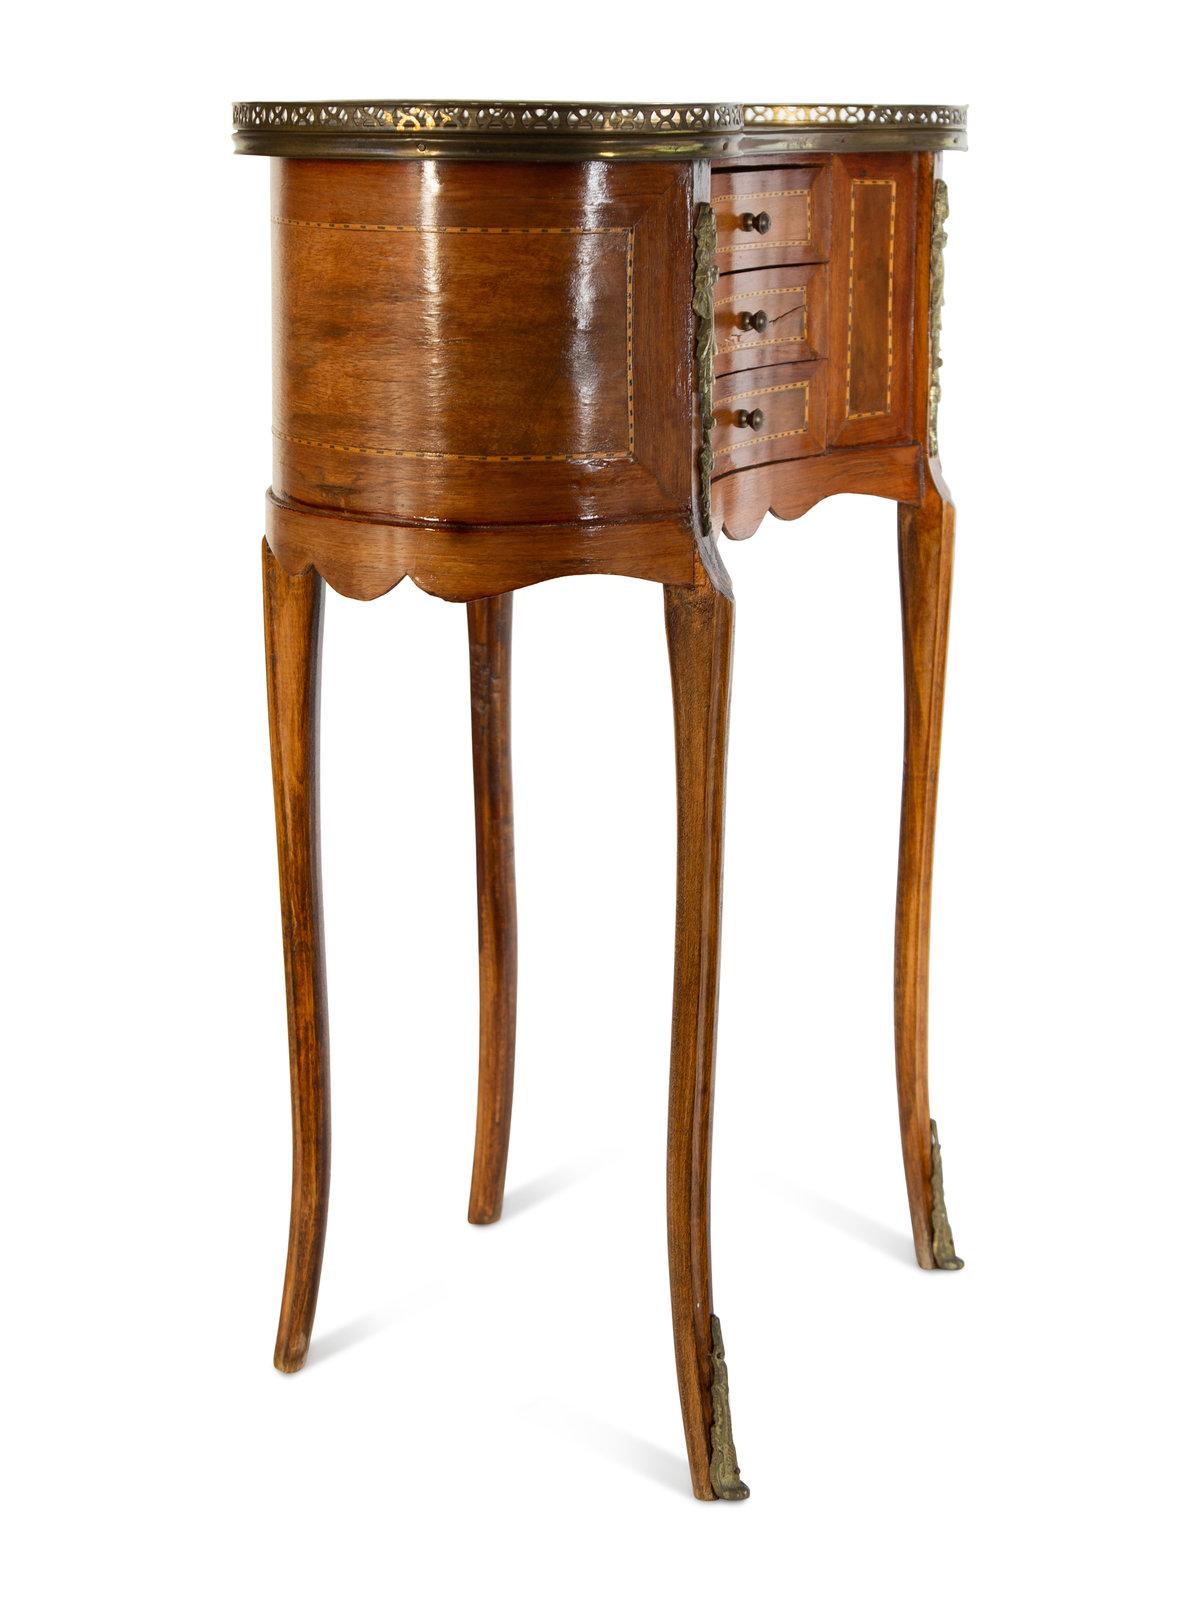 French Fruitwood Marble Top Kidney Shape Side Table with Gallery, Late 19th Century